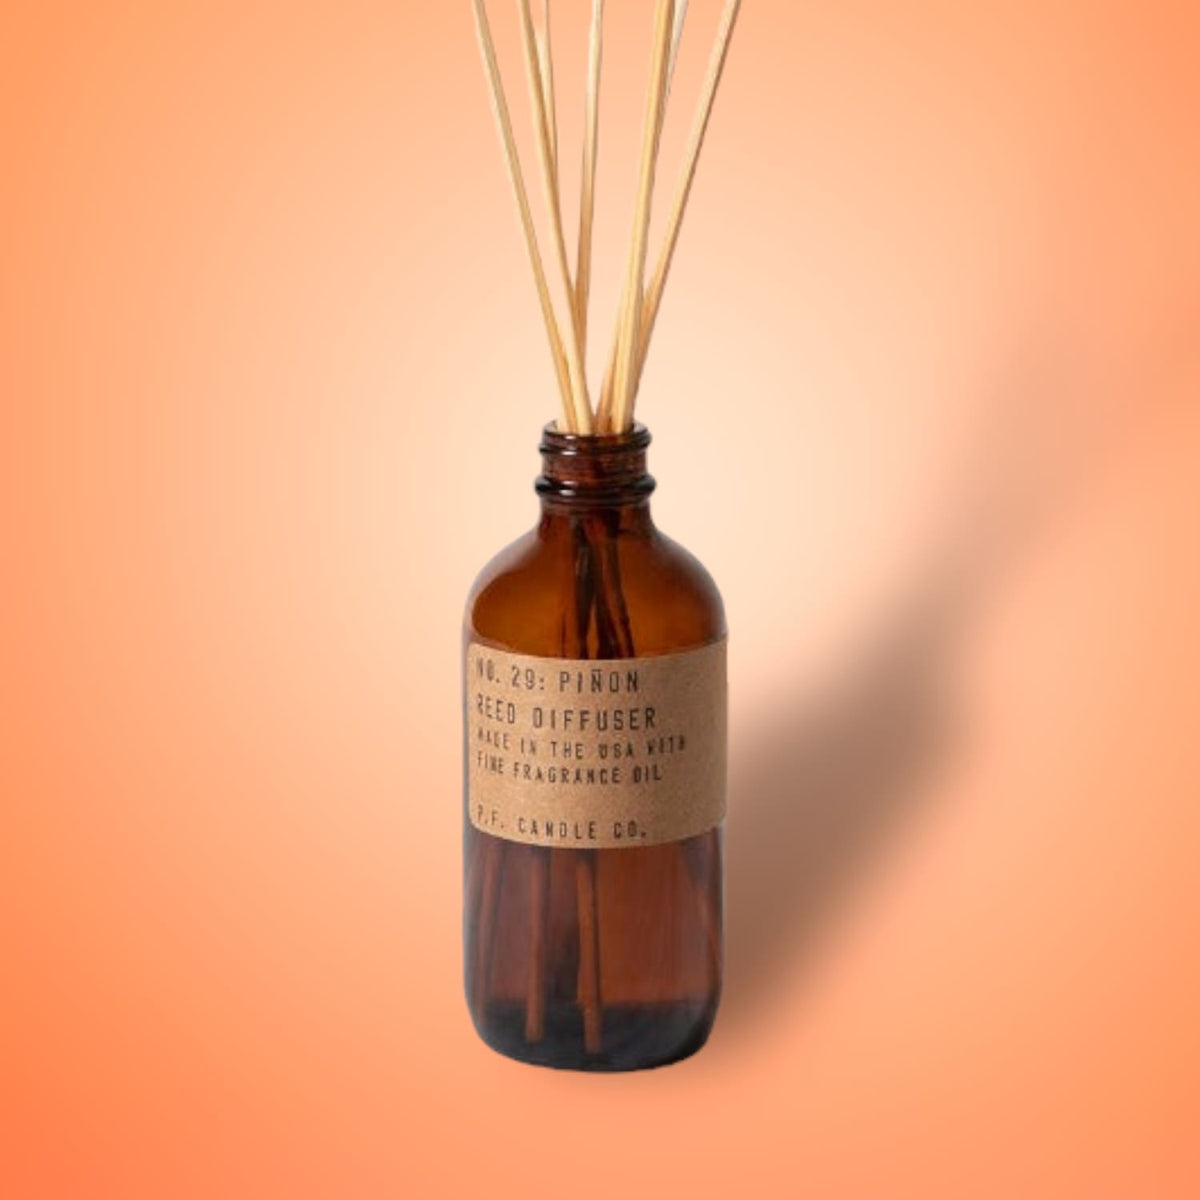 P.f. Candle Co. Reed Diffuser - Piñon 0922 - Groupbycolor - 